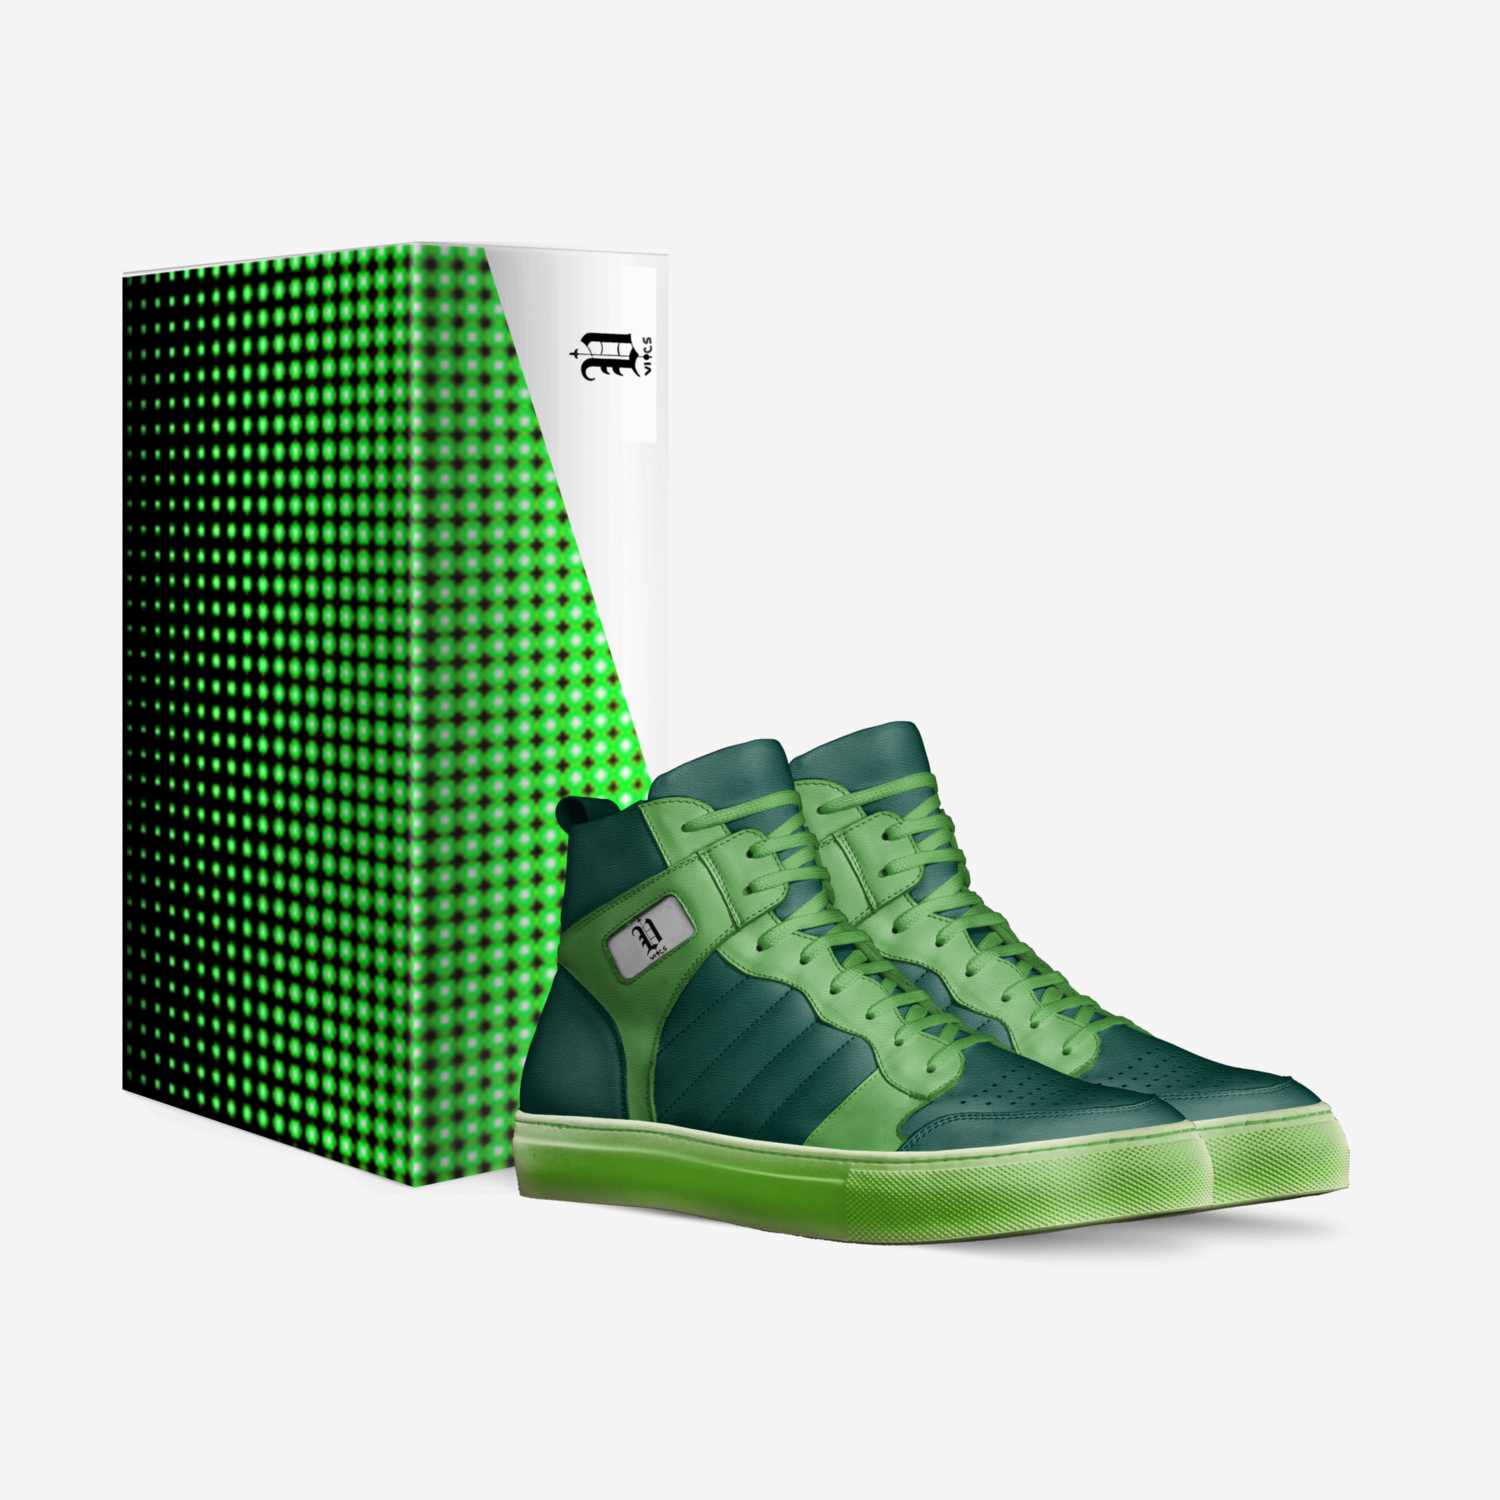 vics green style custom made in Italy shoes by Brayden Murphy | Box view